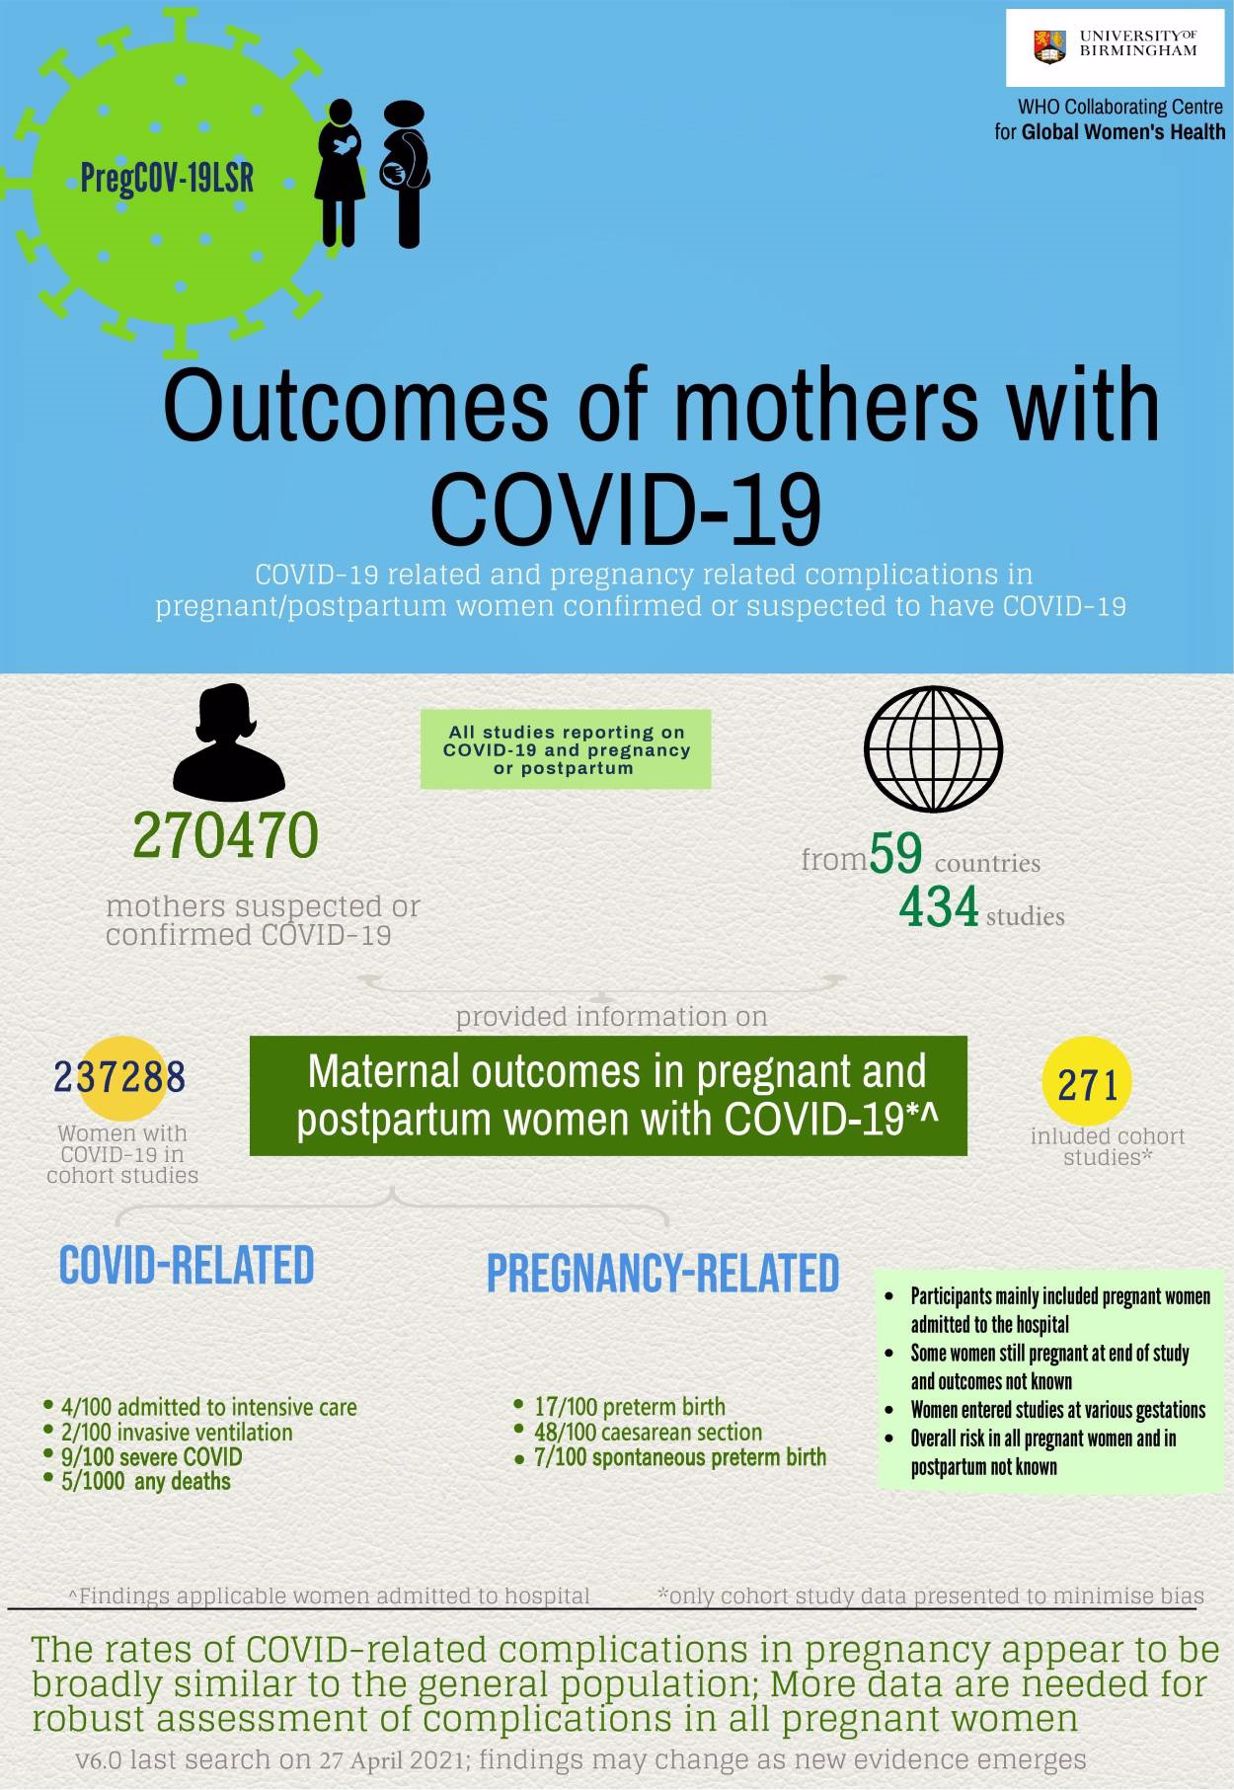 Diagram explaining maternal outcomes in pregnant and postpartum women with Covid-19